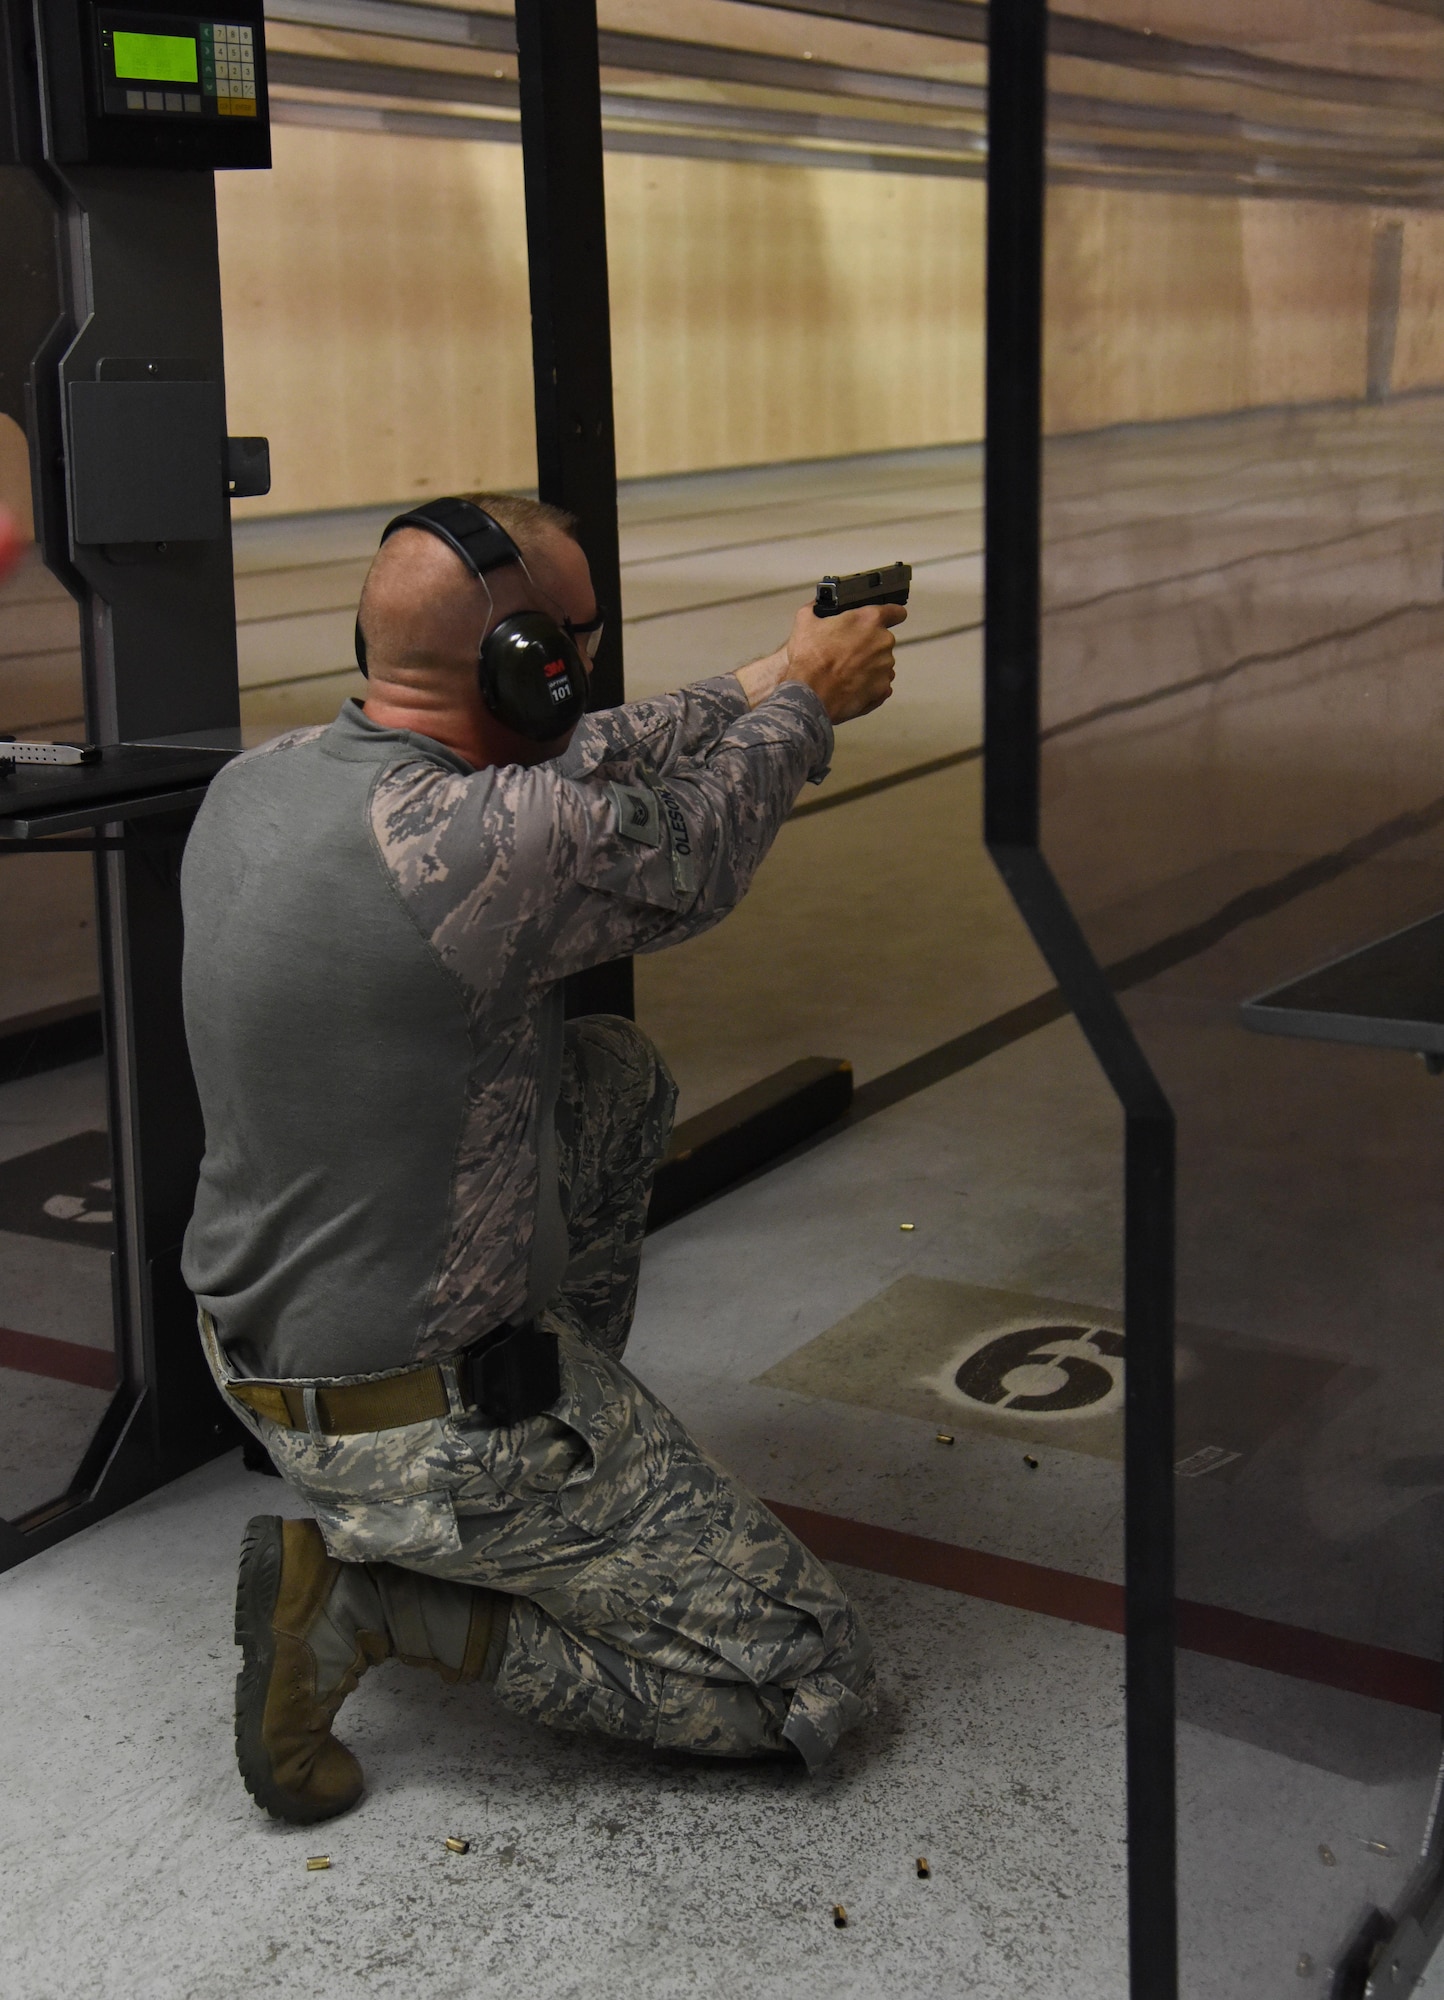 Tech. Sgt. Matthew Oleson, 81st Security Forces Squadron flight chief, fires his weapon during the 81st SFS law enforcement team competition shoot in the indoor firing range May 17, 2017, on Keesler Air Force Base, Miss. The event was held during National Police Week, which recognizes the service of law enforcement men and women who put their lives at risk every day. (U.S. Air Force photo by Kemberly Groue)